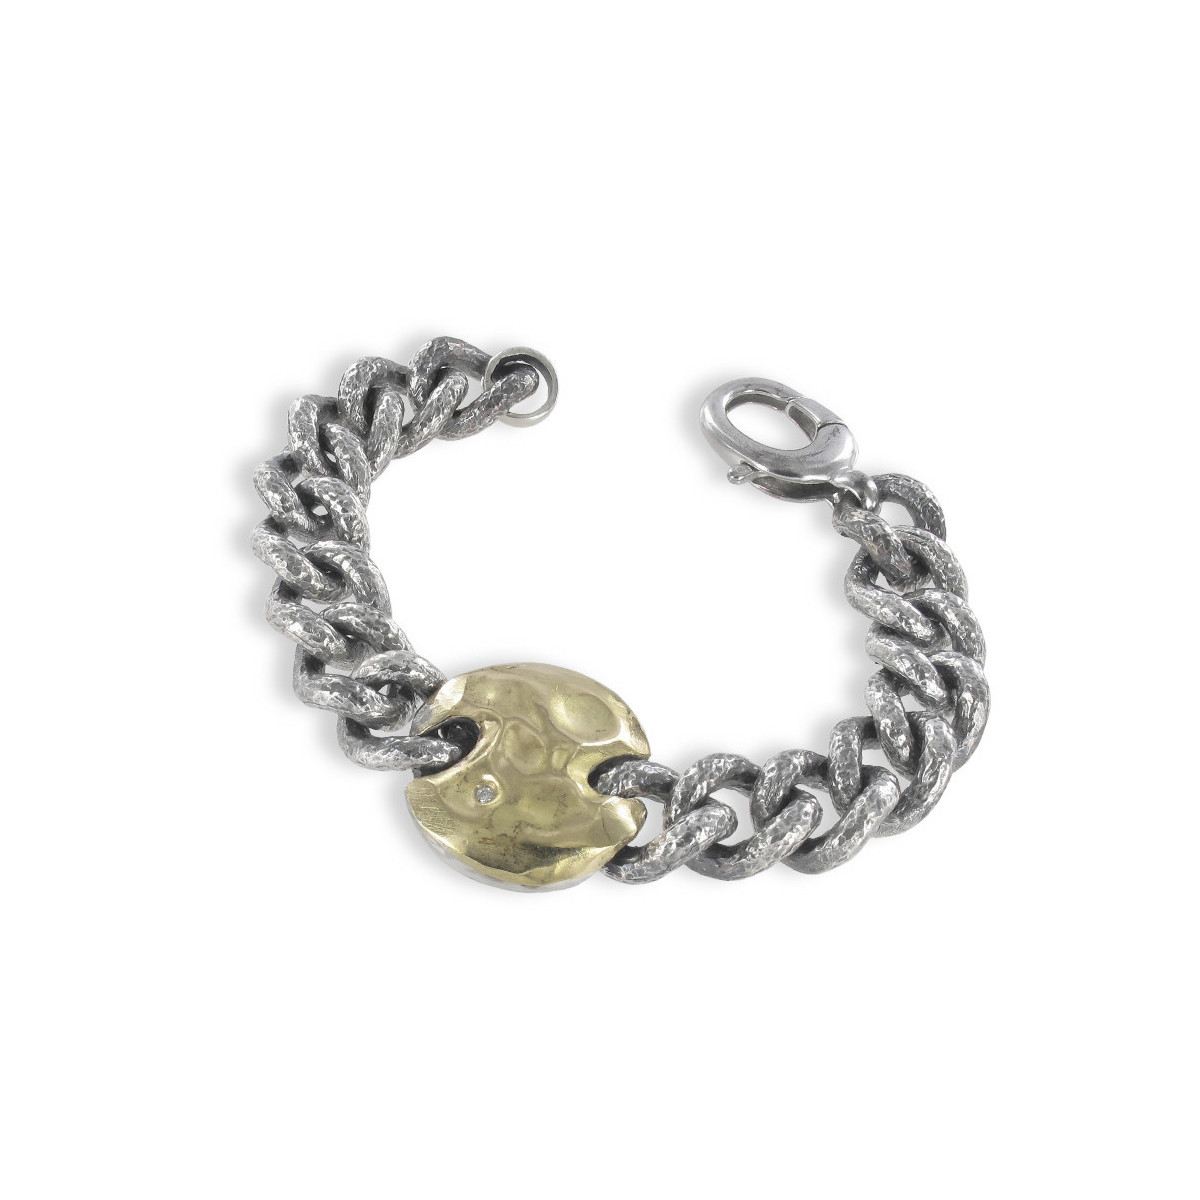 SILVER AND GOLD BRACELET WITH VOLUME